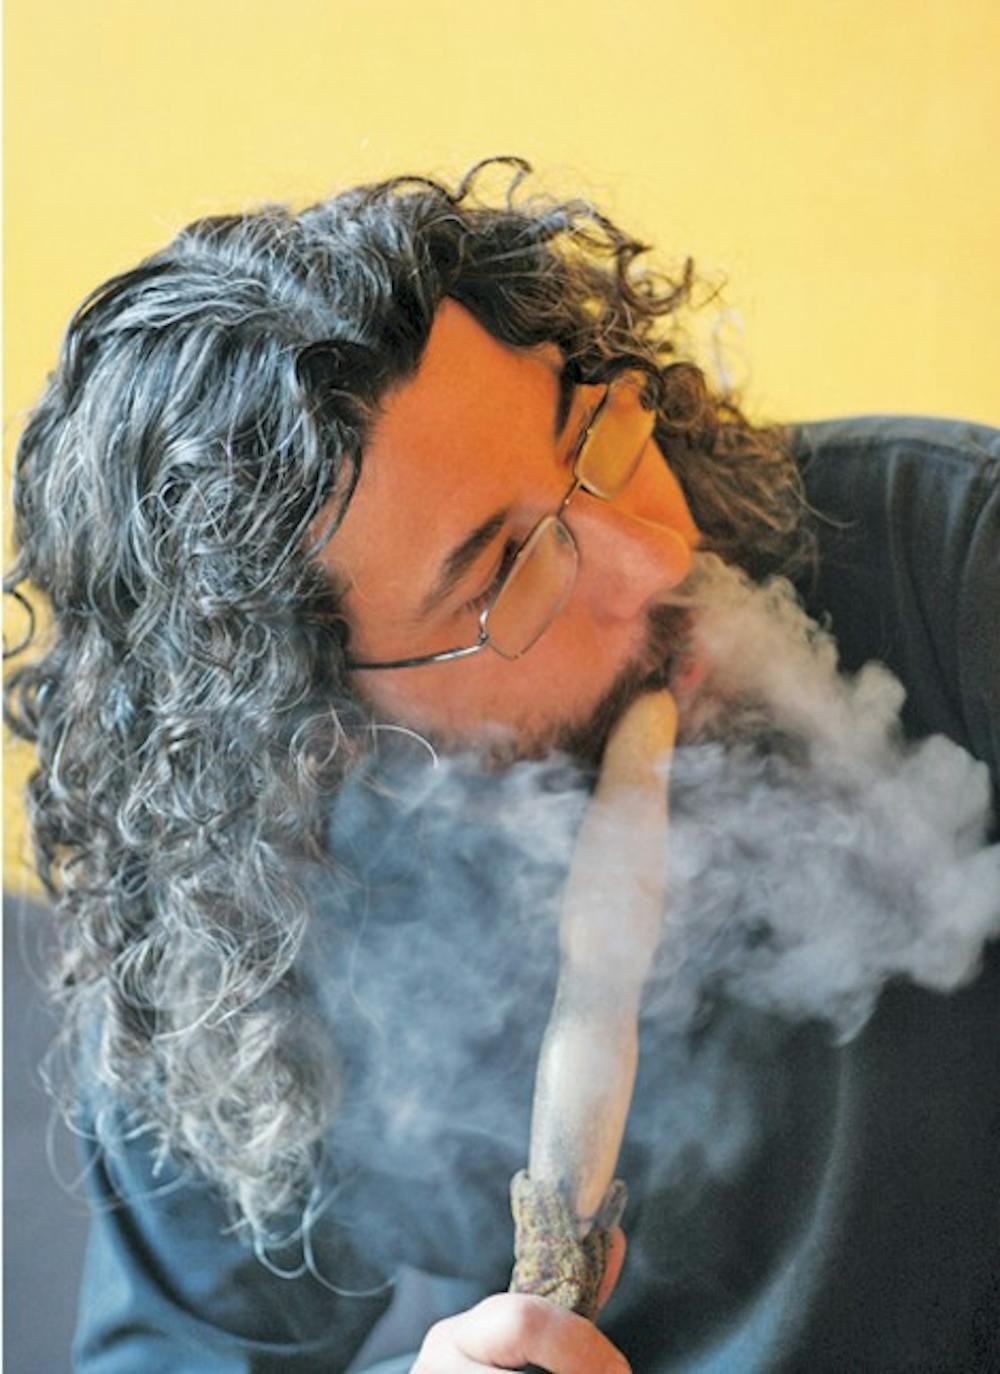 Adam Bliss’s hookah bar, Hookah Bliss, has been fined for violating the state’s indoor smoking ban. DTH file/BJ Dworak